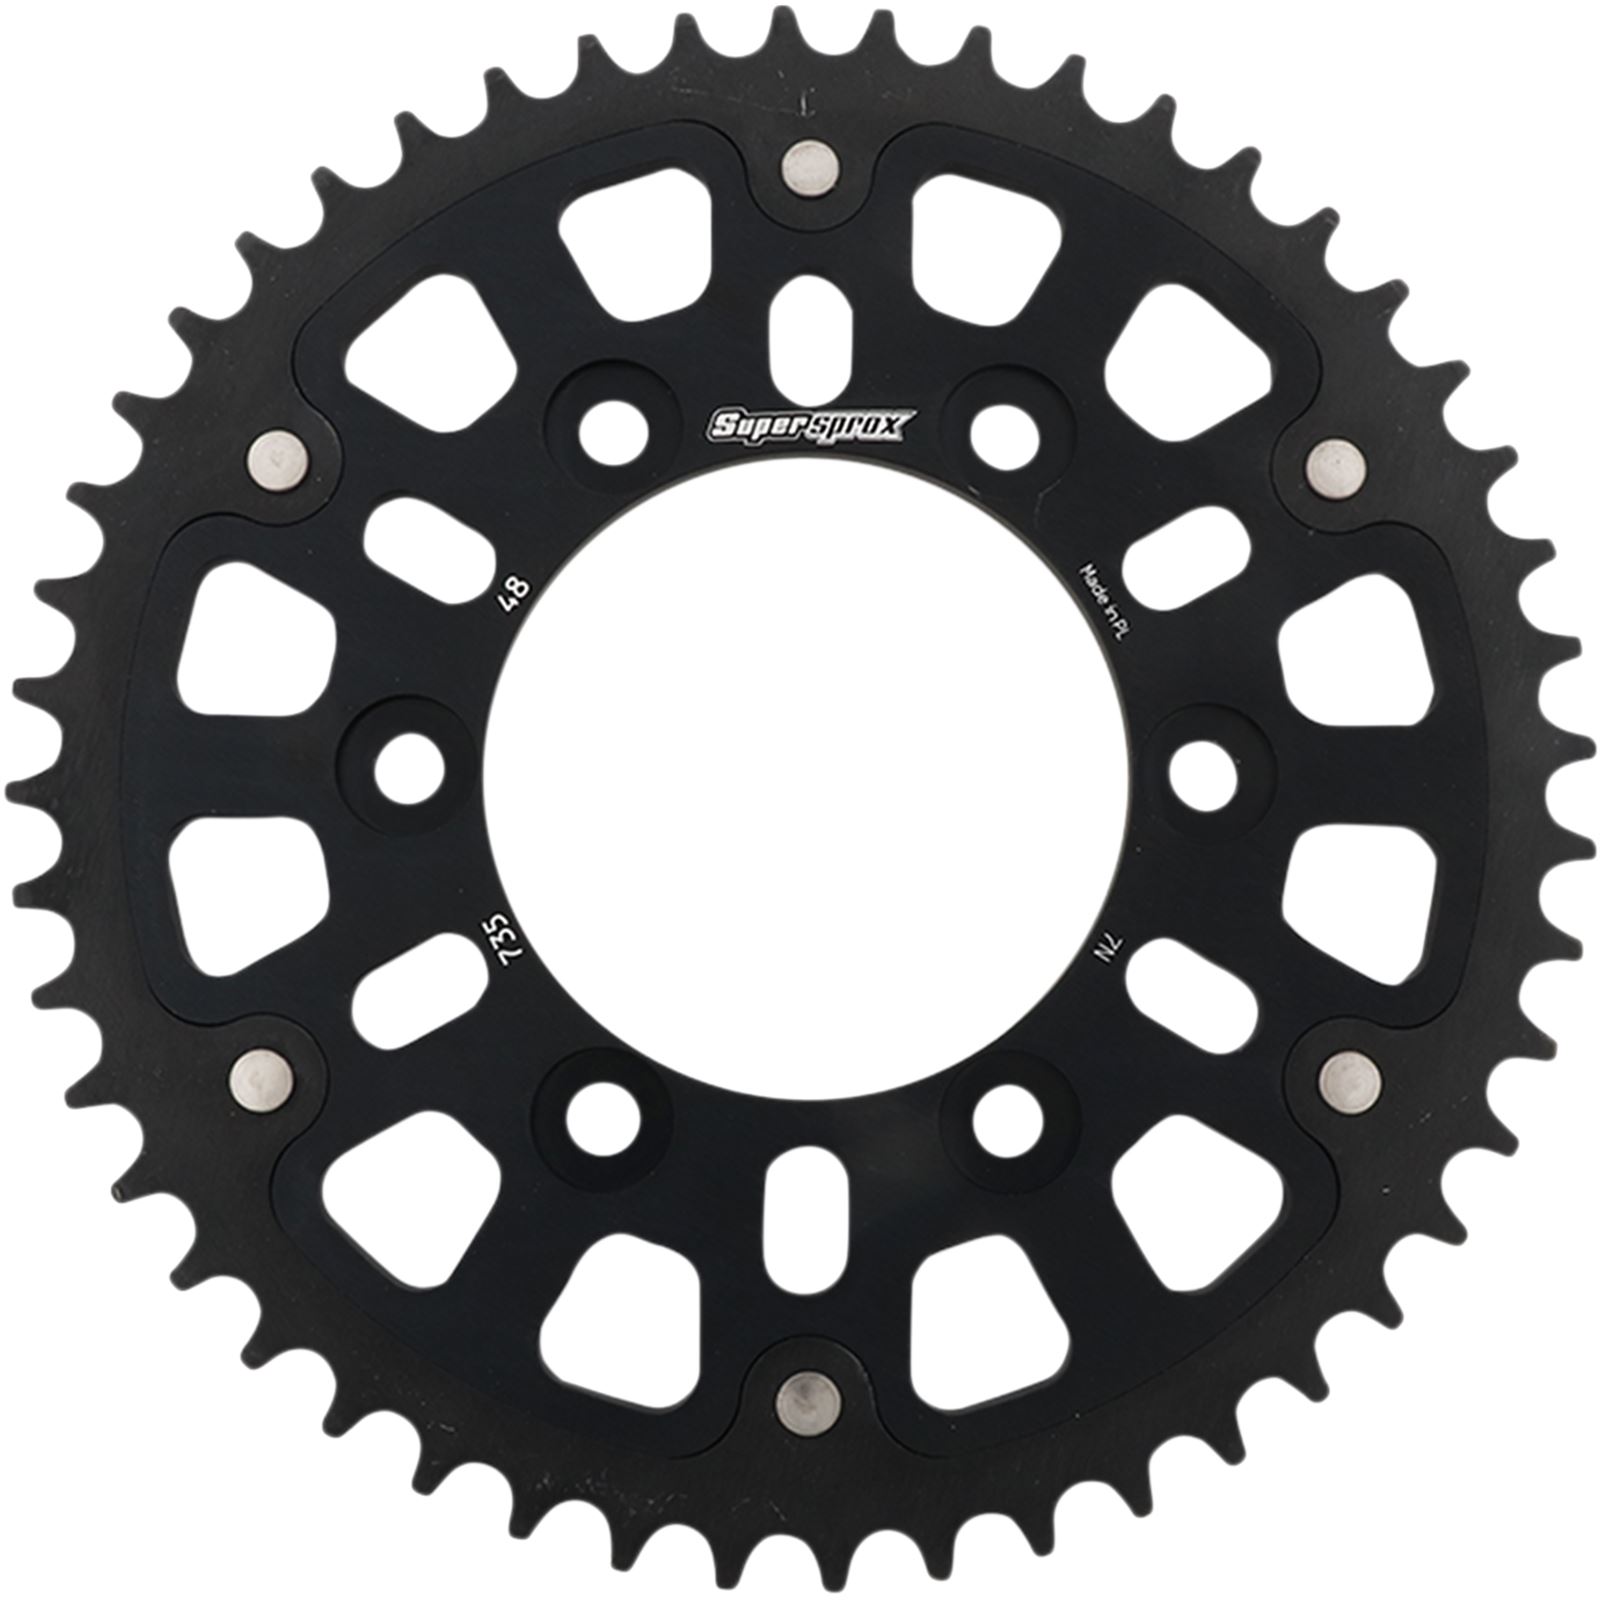 Supersprox Stealth Rear Sprocket - 48-Tooth - Black for Ducati